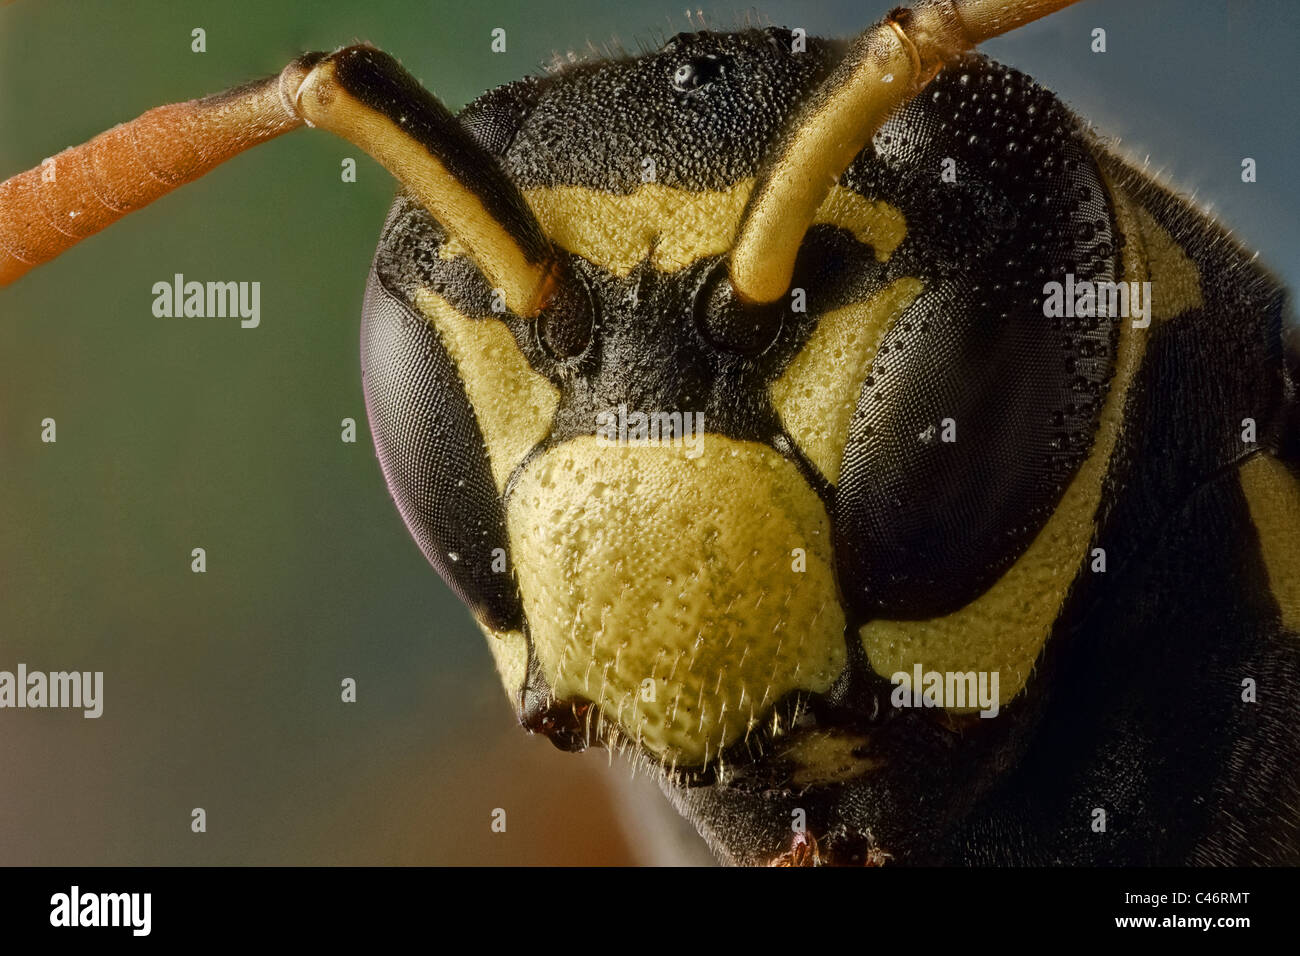 Polistes dominula or european paper wasp; considered an invasive species in USA and Canada. Stock Photo